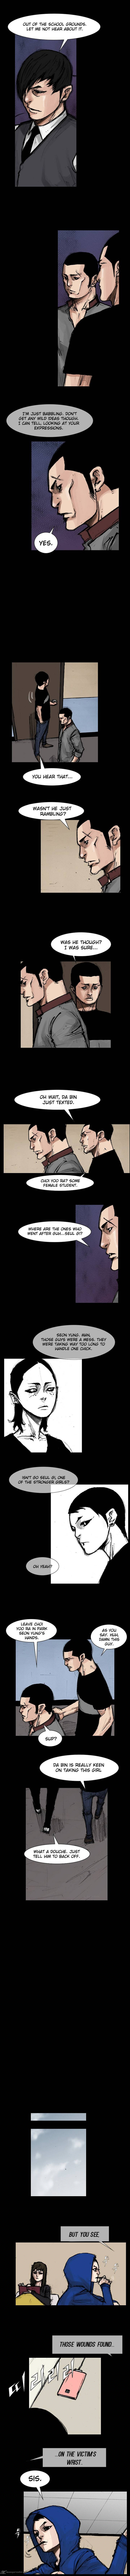 Dokgo 2 Chapter 52 Page 5